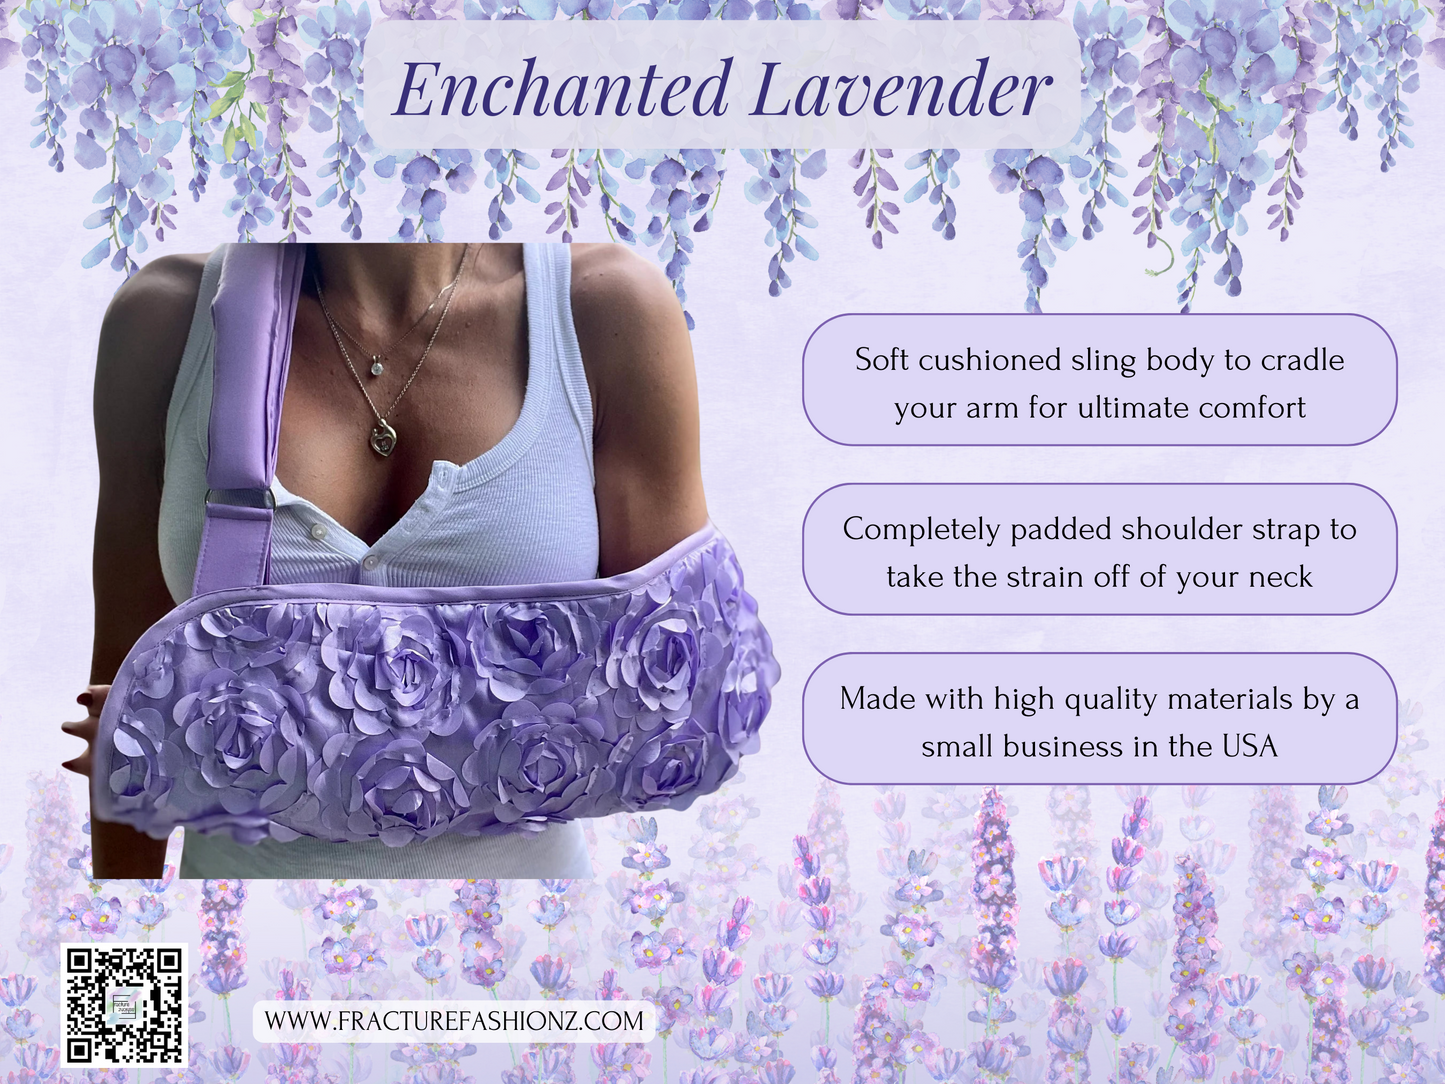 Enchanted Lavender: Padded Arm Sling with 3D Chiffon Flowers